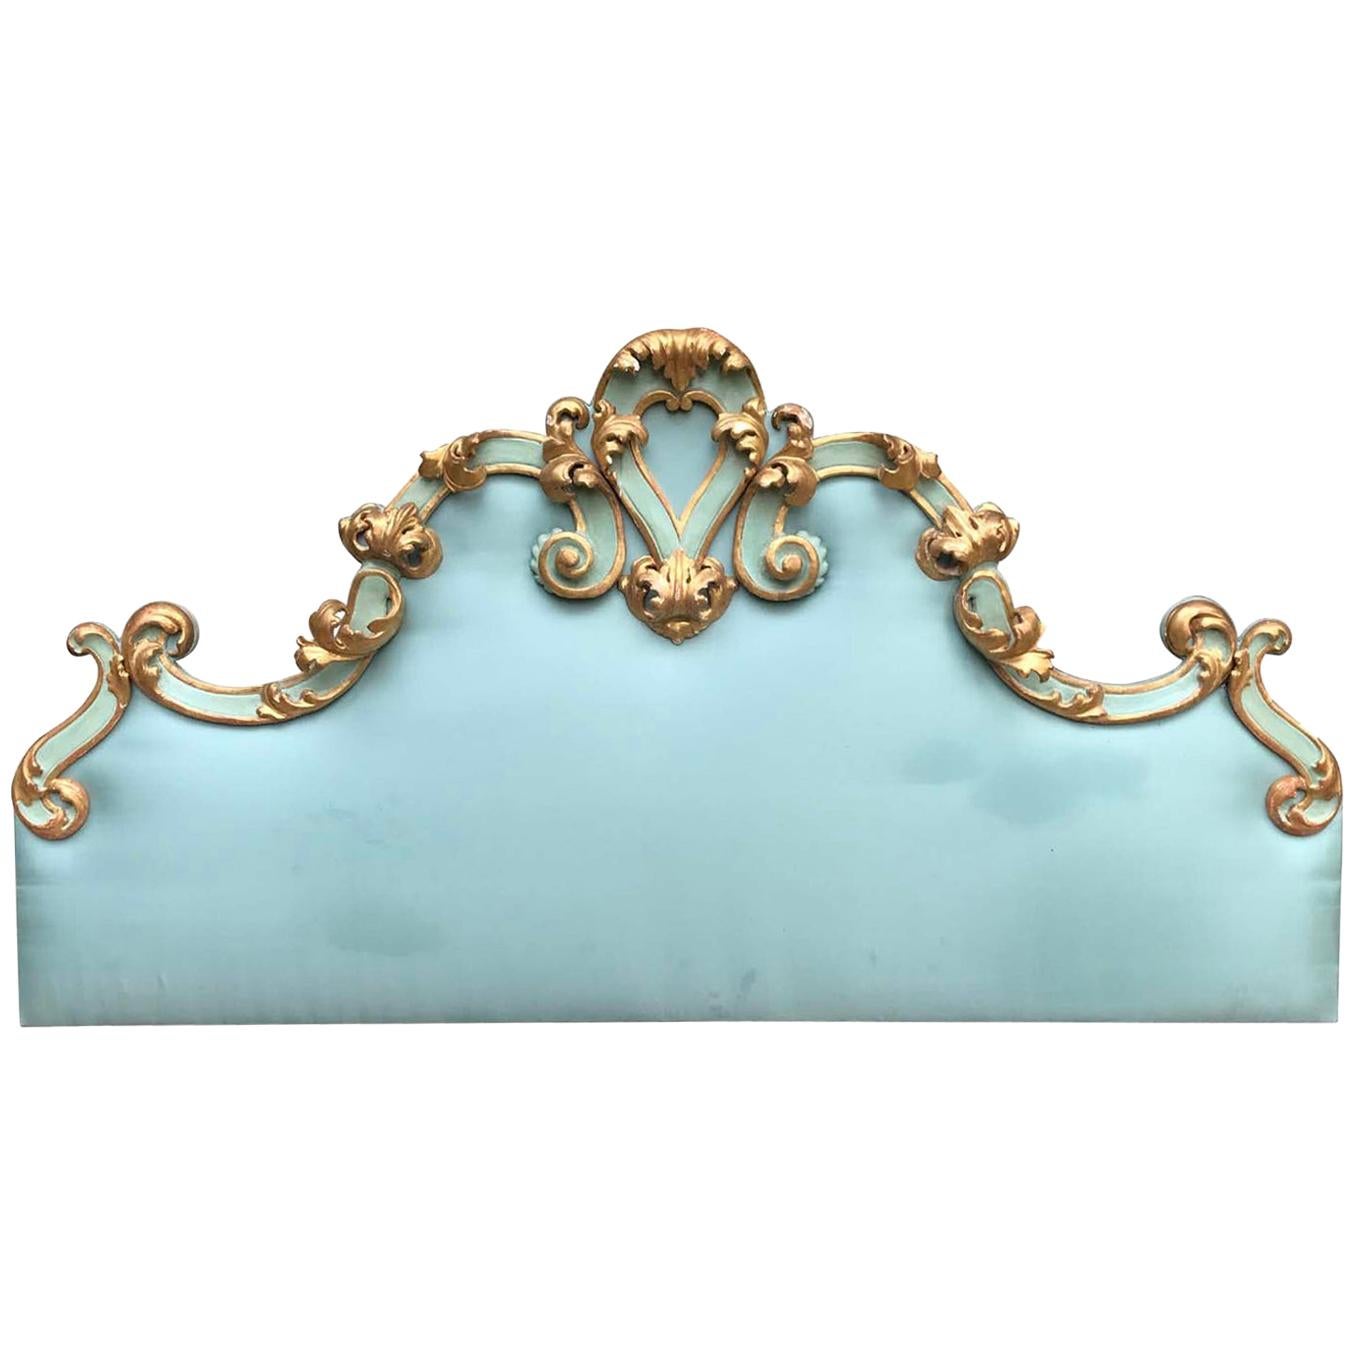 Italian Baroque Style Giltwood Headboard 20th Century with Turquoise Upholstery